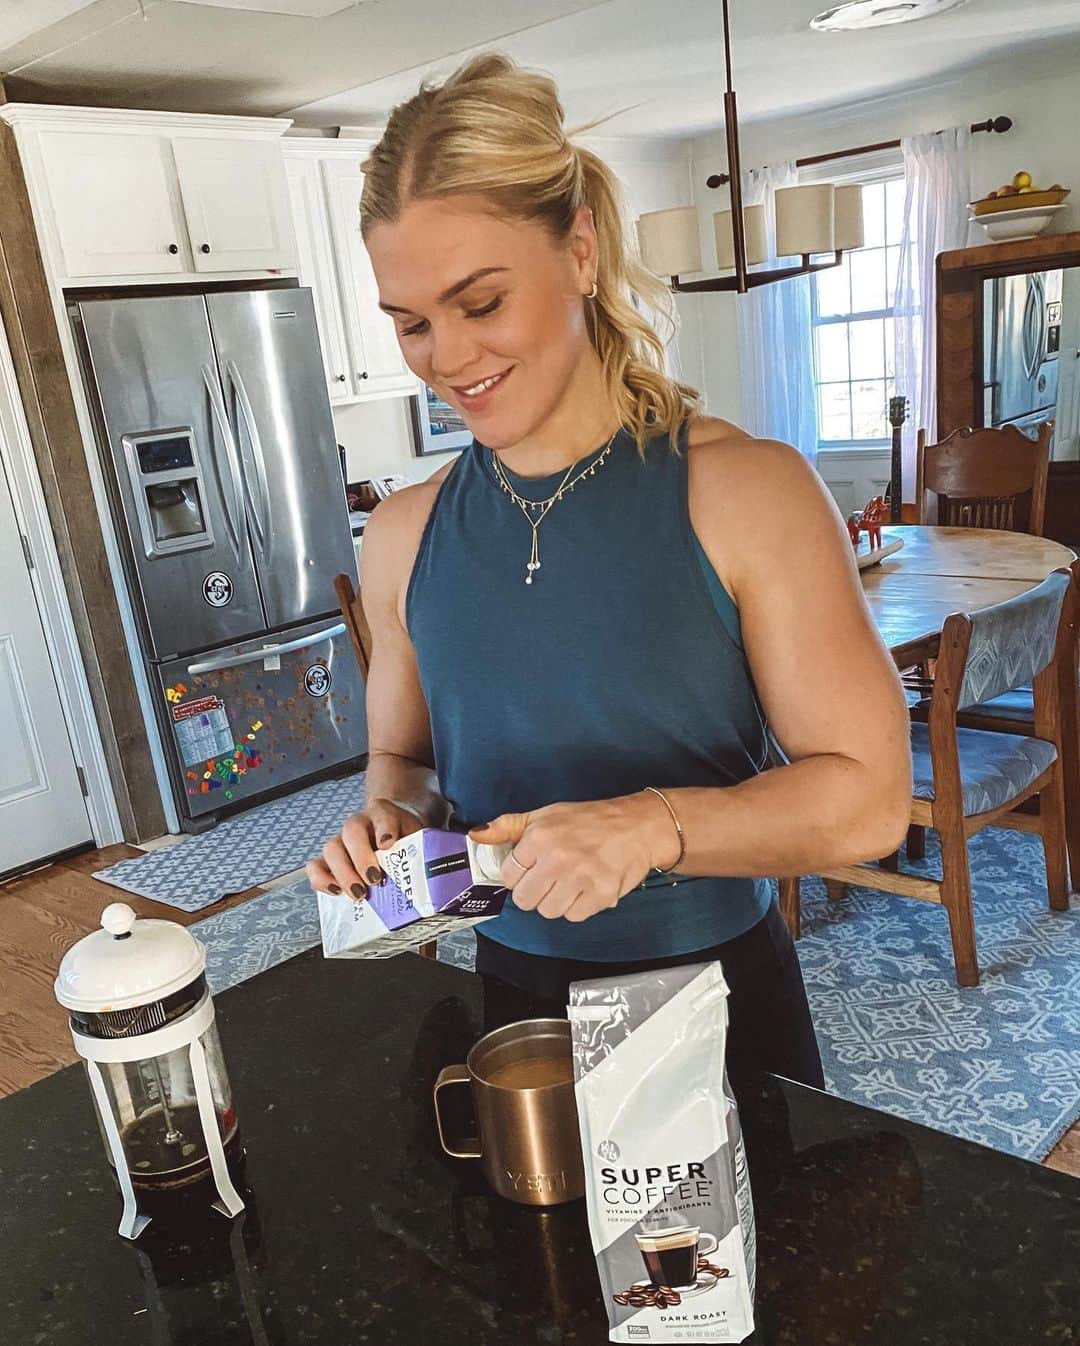 Katrin Tanja Davidsdottirのインスタグラム：「Excited & PROUD to get to tell you about my newest partnership & investment with @drinksupercoffee 🤩🤝☕️🌟 - I found their super creamer about a year ago (you know I LOVE my creamers but they all had so much added sugar in 😩 .. EXCEPT for this one!) so switched to using this one in my coffees + teas. - THEN late last summer I got introduced to the brothers (@jordan_decicco, @jakedecicco & @jimmydecicco5) & got to chat with them & hear their story of how it all started & MAN, you know when your energy just CLICKS with someone?!?! That. Was. That. 🤩✨ Incredible energy, all three of them, with a mission of bringing positive energy to the world: LOVE. THAT & I love that I get to be a part of that. - Excited to finally be a part of the @drinksupercoffee family 🤍 xxx」